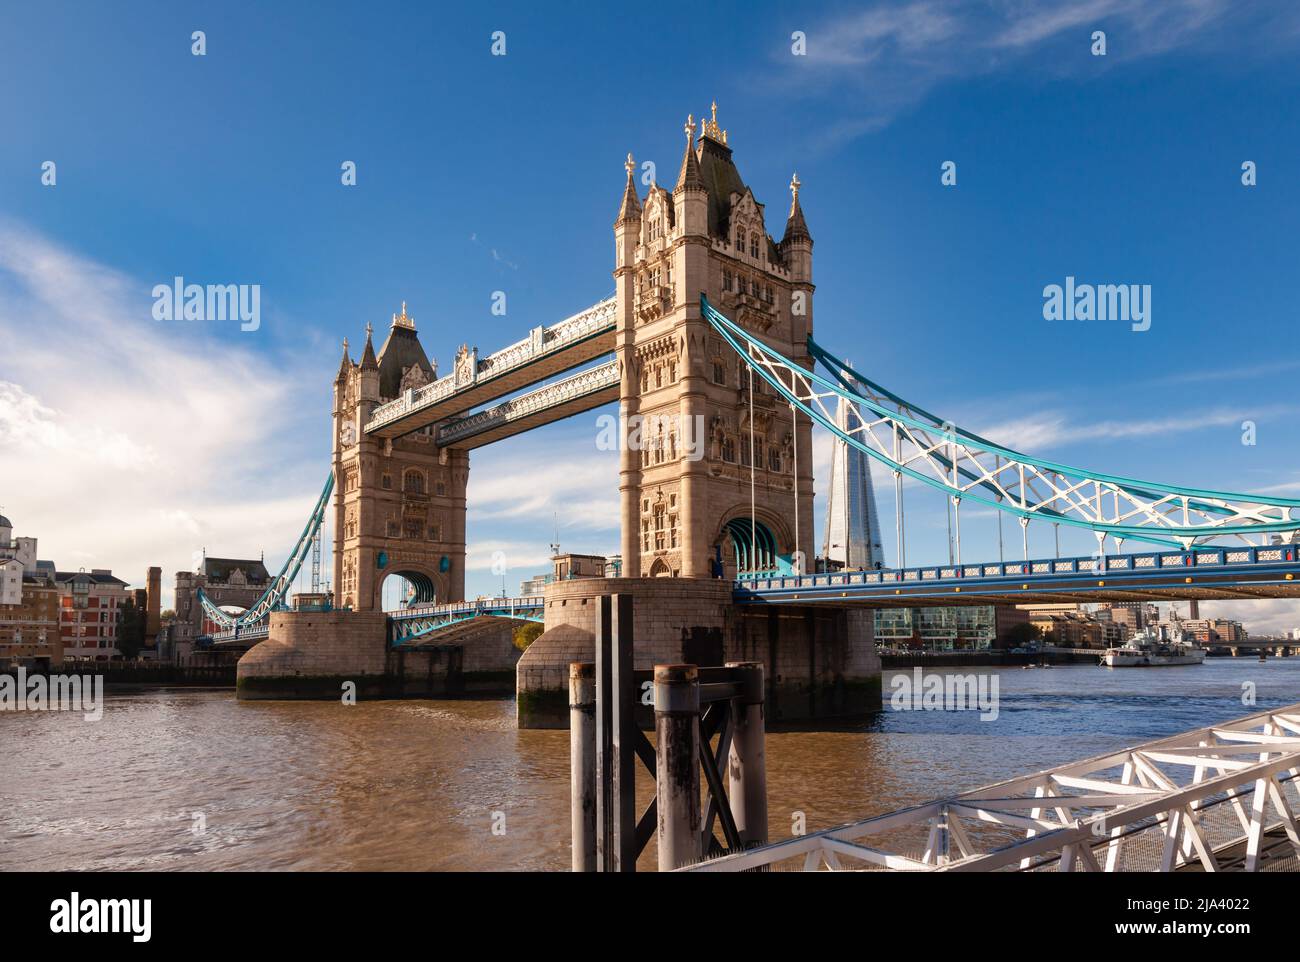 Iconic Victorian Tower Bridge as viewed from the St Katharine Dock, London, UK Stock Photo